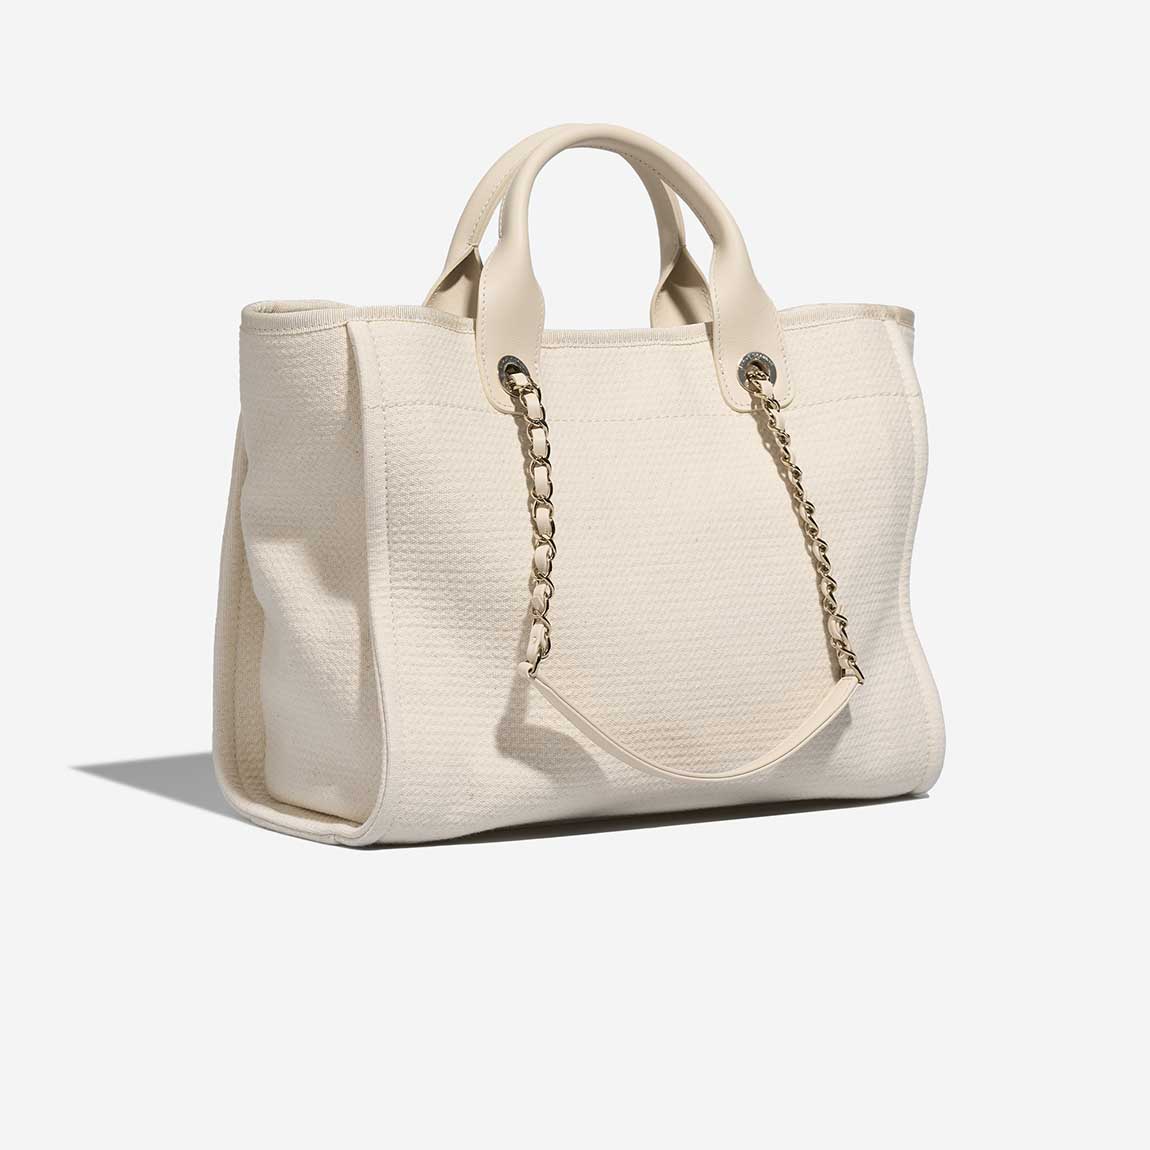 Chanel Deauville Small Canvas Cream | Sell your designer bag